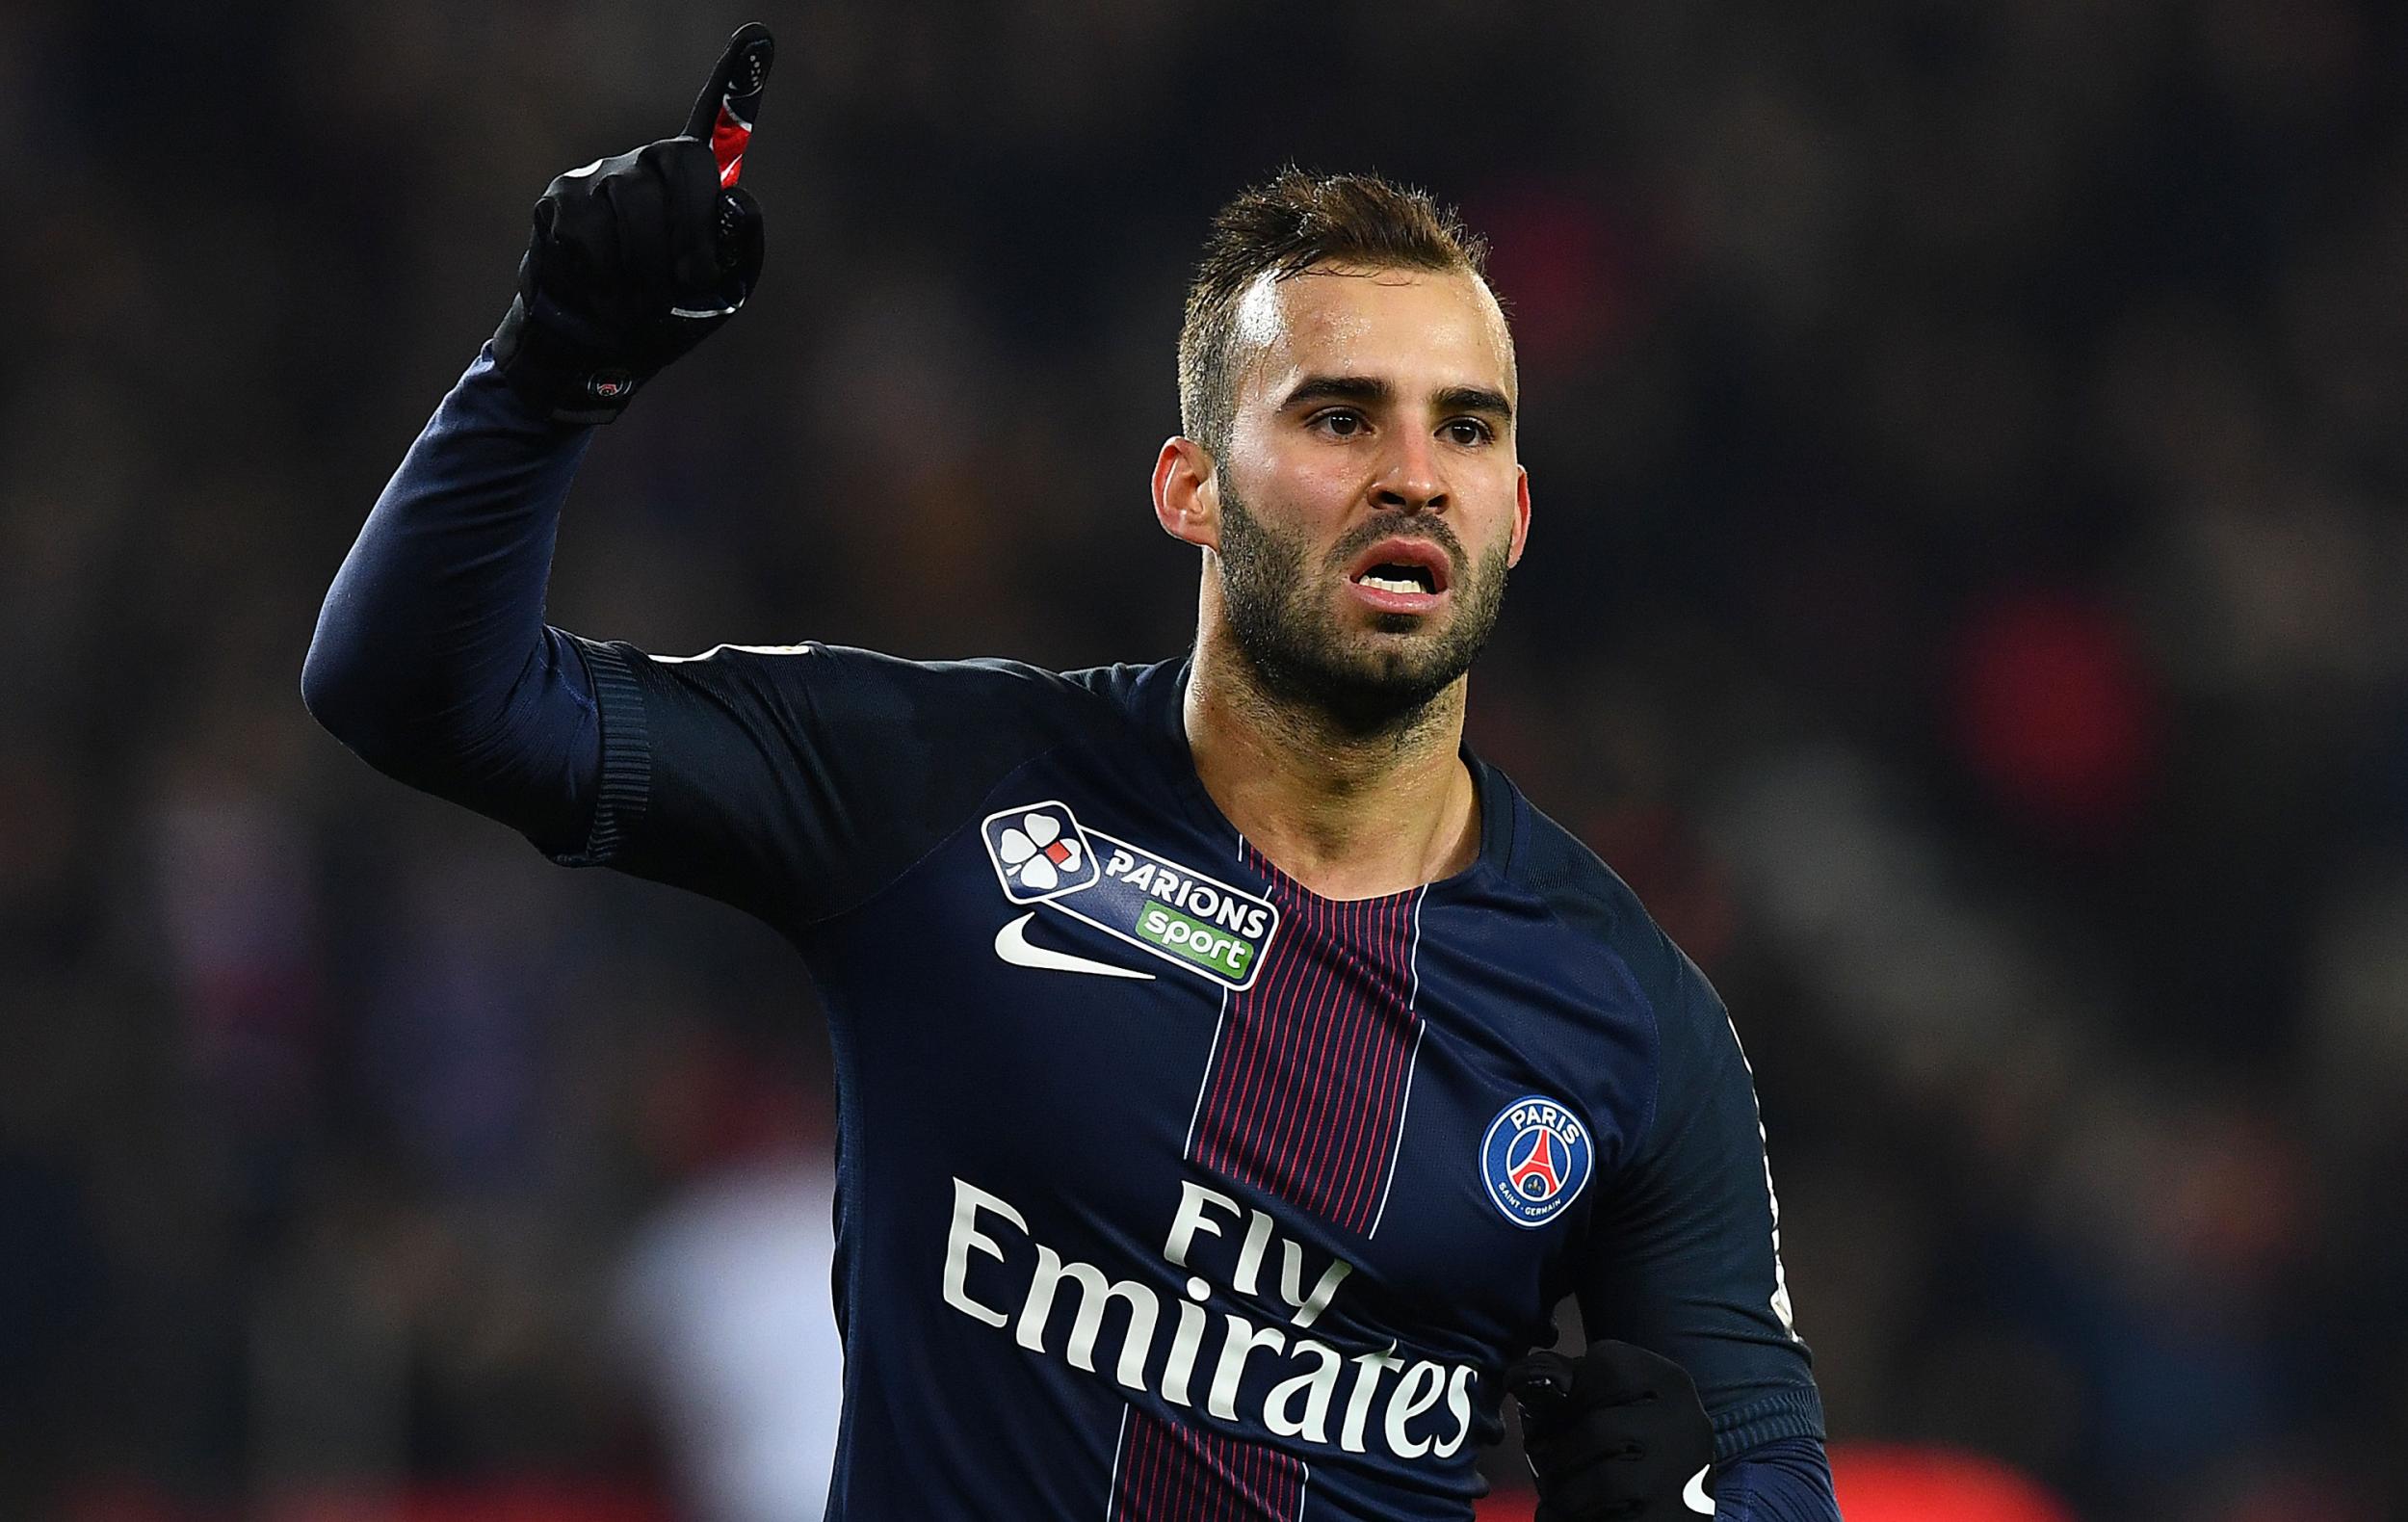 Jese Rodriguez has made just one start for PSG since moving to the French side